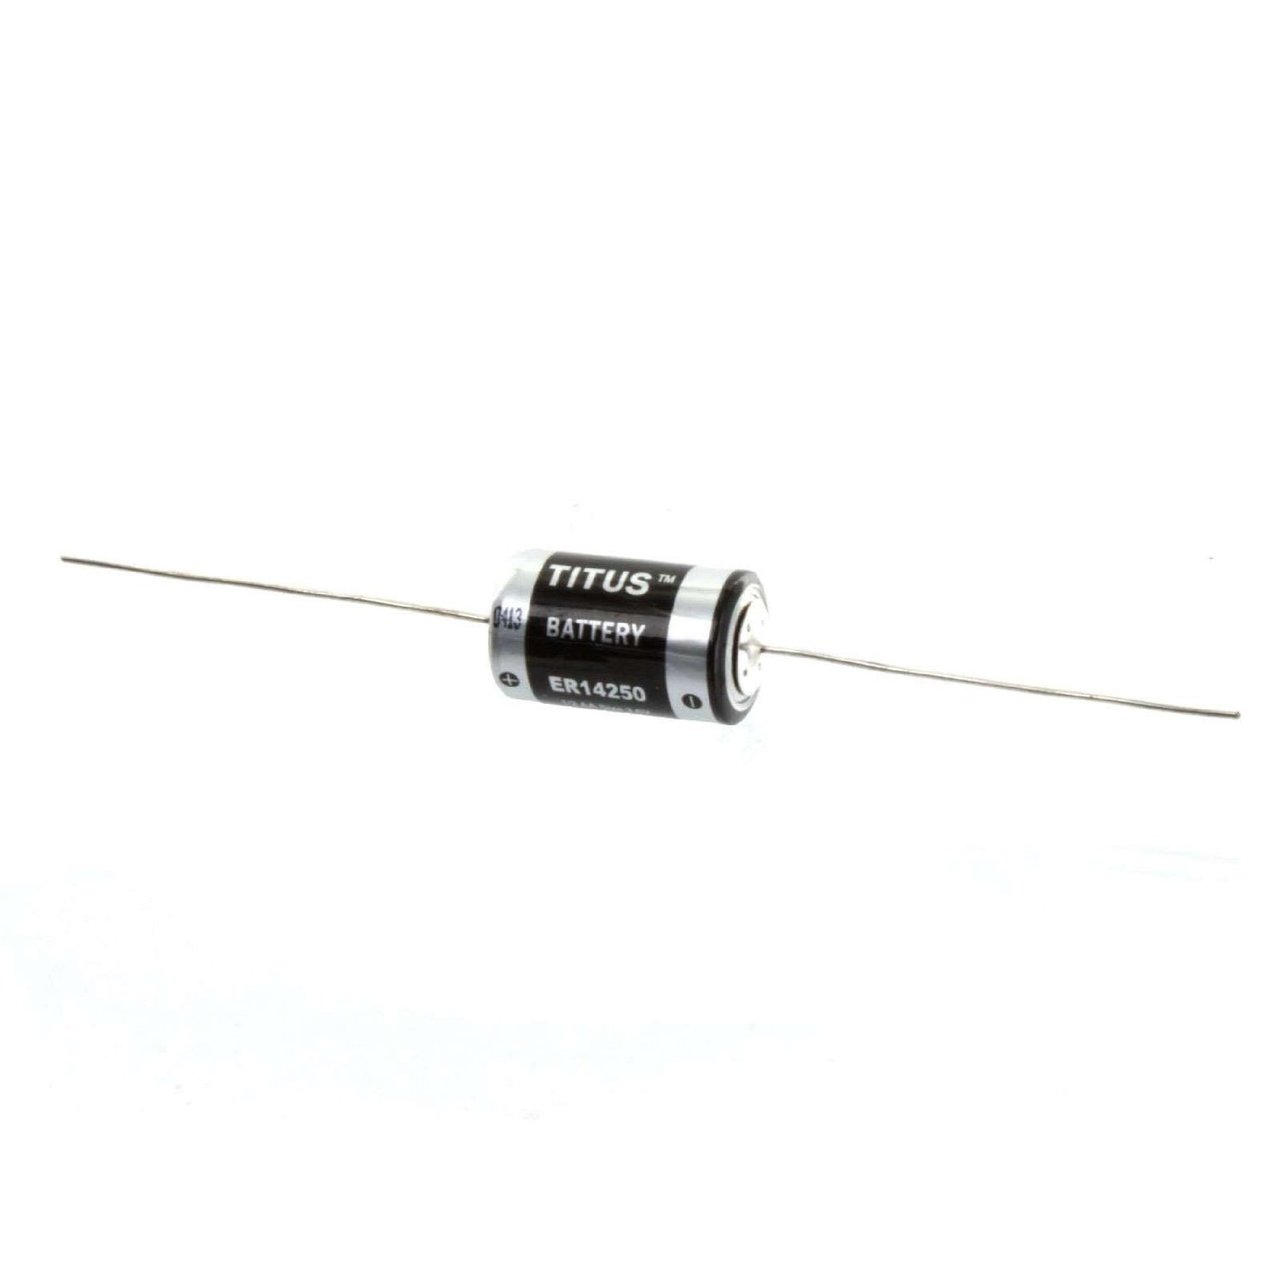 Titus 1/2 AA Size 3.6V ER14250FAX Lithium Battery With Axial Wire Leads - 10 Pack + Free Shipping!